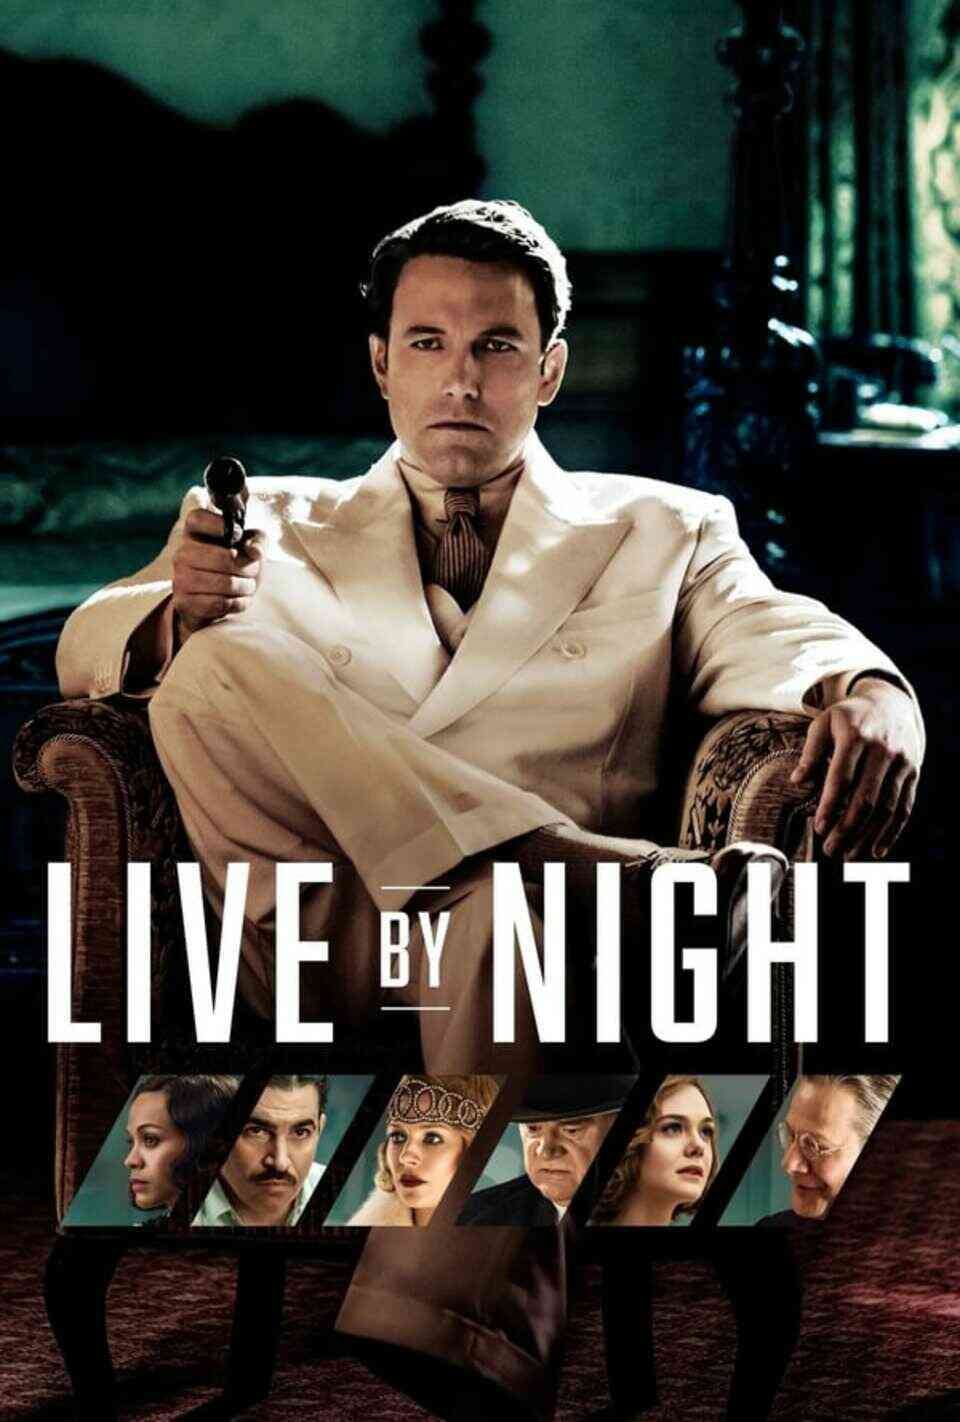 Read Live By Night screenplay.